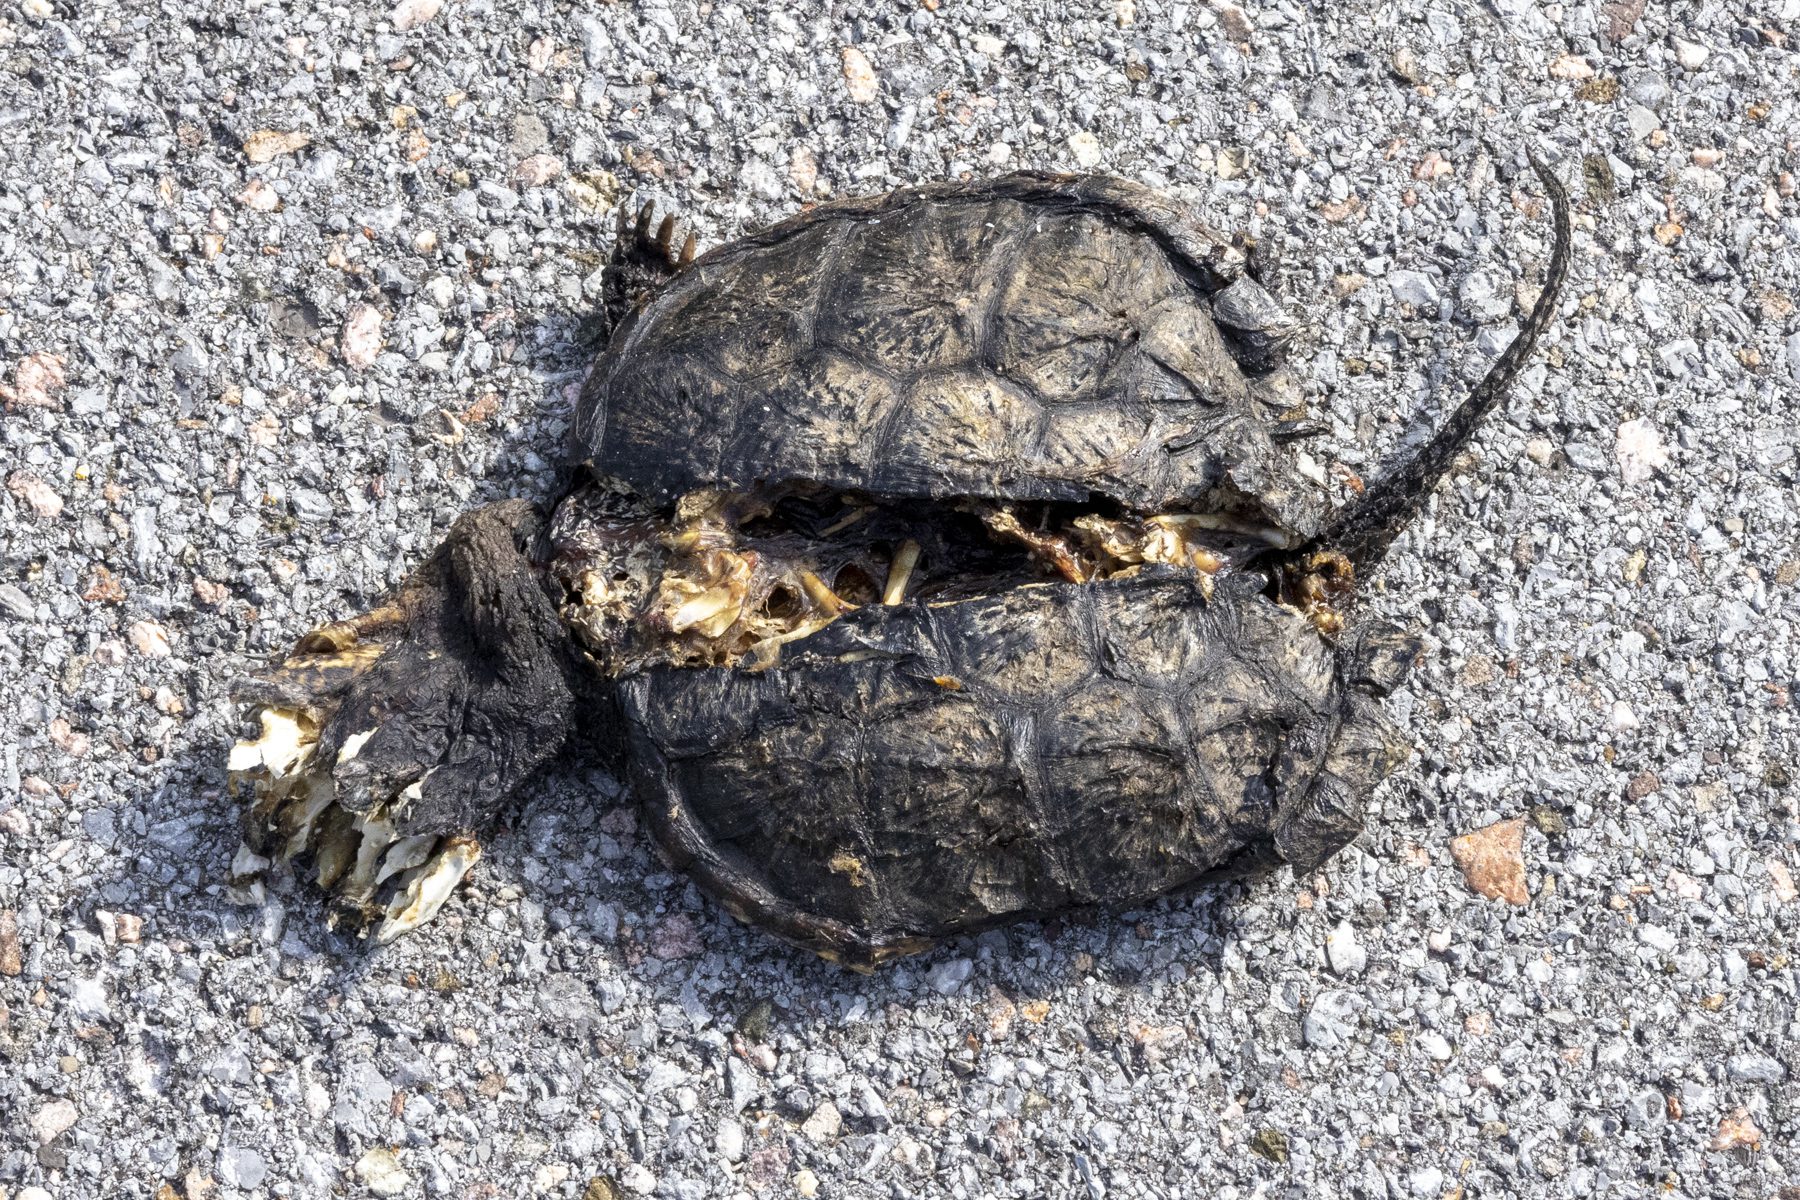 A dead turtle on the road in the Algonquin to Adirondacks corridor